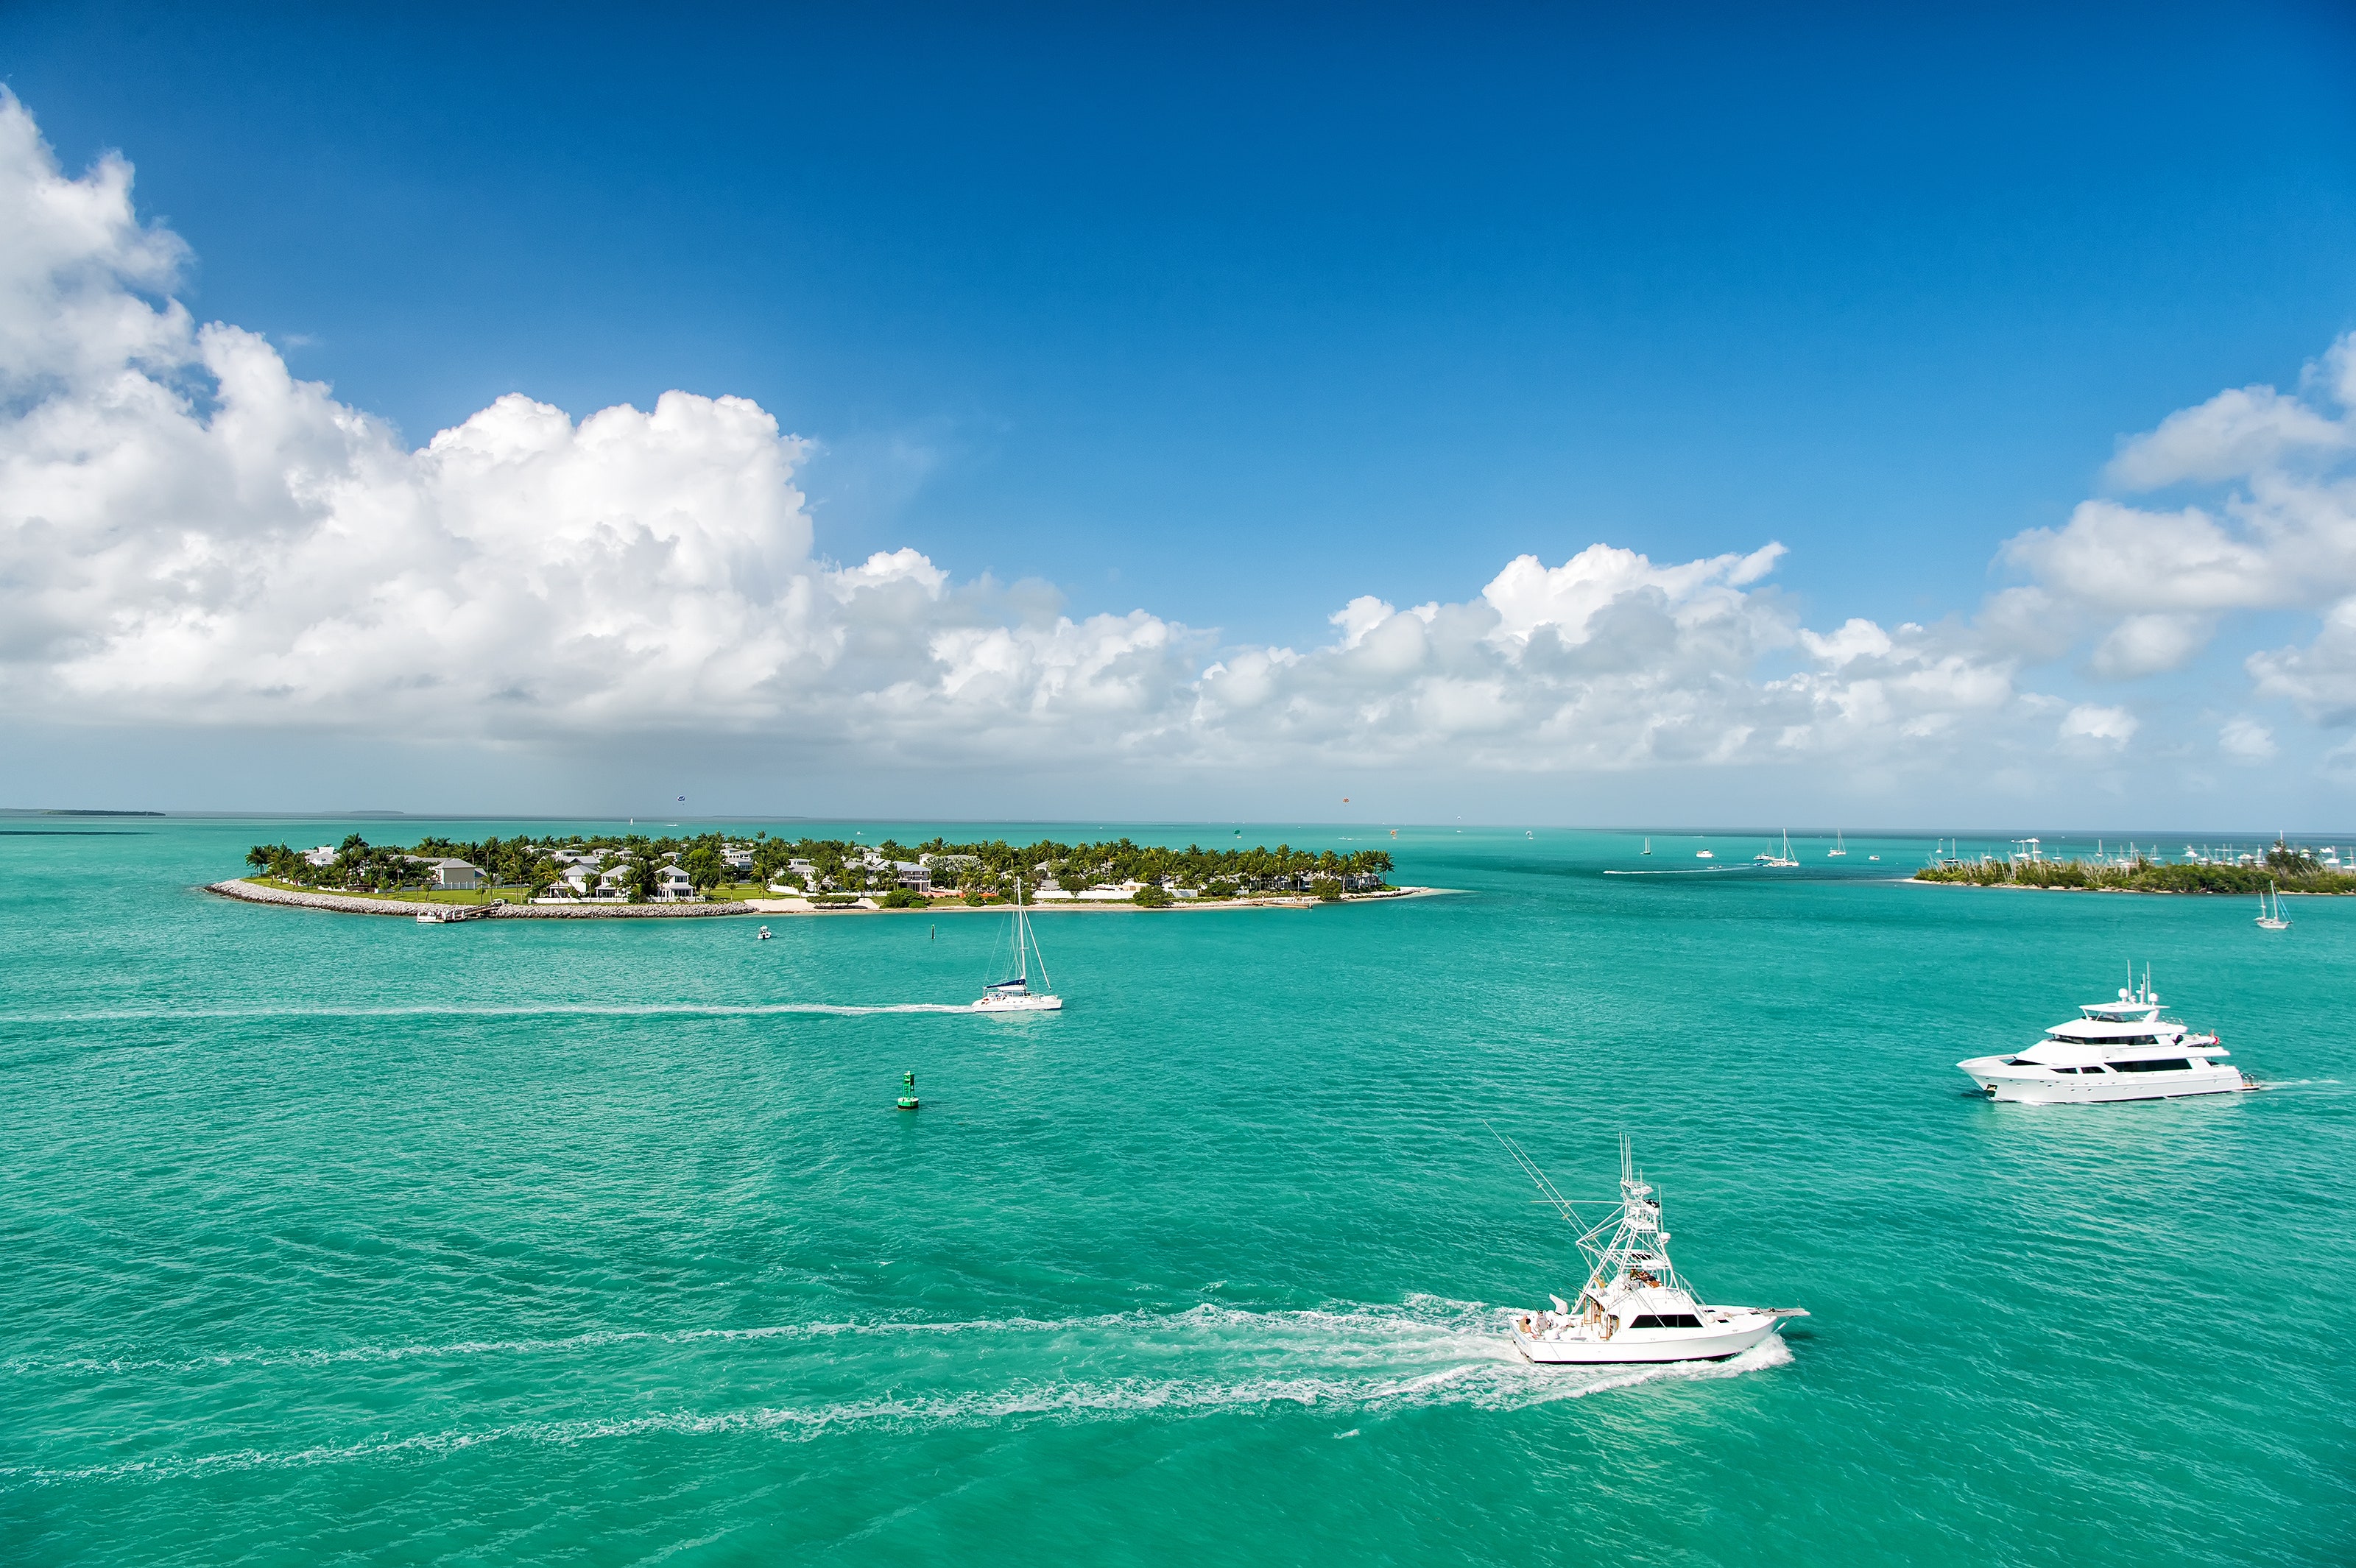 <p>Warm temperatures, calm turquoise waters, and consistent easterly winds make the <a href="https://www.cntraveler.com/gallery/florida-keys-top-resorts?mbid=synd_msn_rss&utm_source=msn&utm_medium=syndication">Florida Keys</a> one of the best places to learn to sail in the US. Stay at the Key Lime Sailing Club and cottages resort on Buttonwood Sound in Key Largo and take lessons at the <a href="https://www.americansailingacademy.com/">American Sailing Academy</a>, located onsite.</p> <p>Alternatively, outdoor education organization Outward Bound, which offers program scholarships, is hosting a <a href="https://cna.st/affiliate-link/qsSkLvaohicBddXbkpp7ZBHEu2SDmRAGX7rTf64KAq5GUxjxyWPzxsFMxbAMz6YphwMz6xt9dgSVV4XR31RJRTH6jYN9DE6mqEPeVdN2bbGJKsLDeQw5SUDzTkqMLYTSKBWv98LLAdwKXt2rej3M8Jqb4k3De3VxZ7x2QRsCgawU9mqt3STTuErv" rel="sponsored">Florida Keys sailing excursion</a> for adults in March/April 2025. Participants will live on a 30-foot open sailboat for slightly over a week learning beginner, intermediate, and advanced skills in chart and compass navigation, small boat seamanship, weather observation, and anchoring.</p><p>Sign up to receive the latest news, expert tips, and inspiration on all things travel</p><a href="https://www.cntraveler.com/newsletter/the-daily?sourceCode=msnsend">Inspire Me</a>